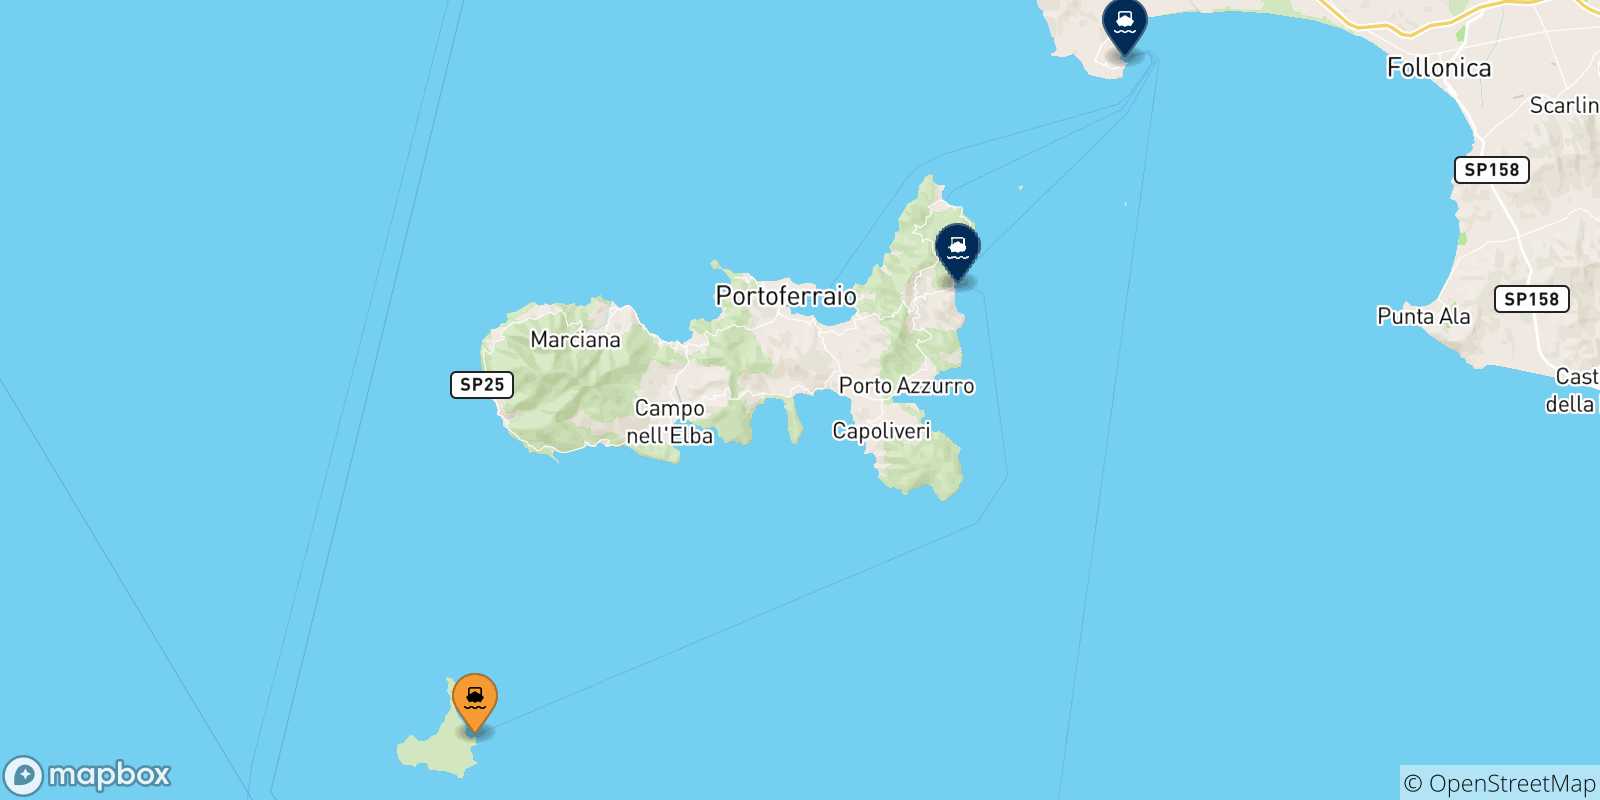 Map of the destinations reachable from Pianosa Island